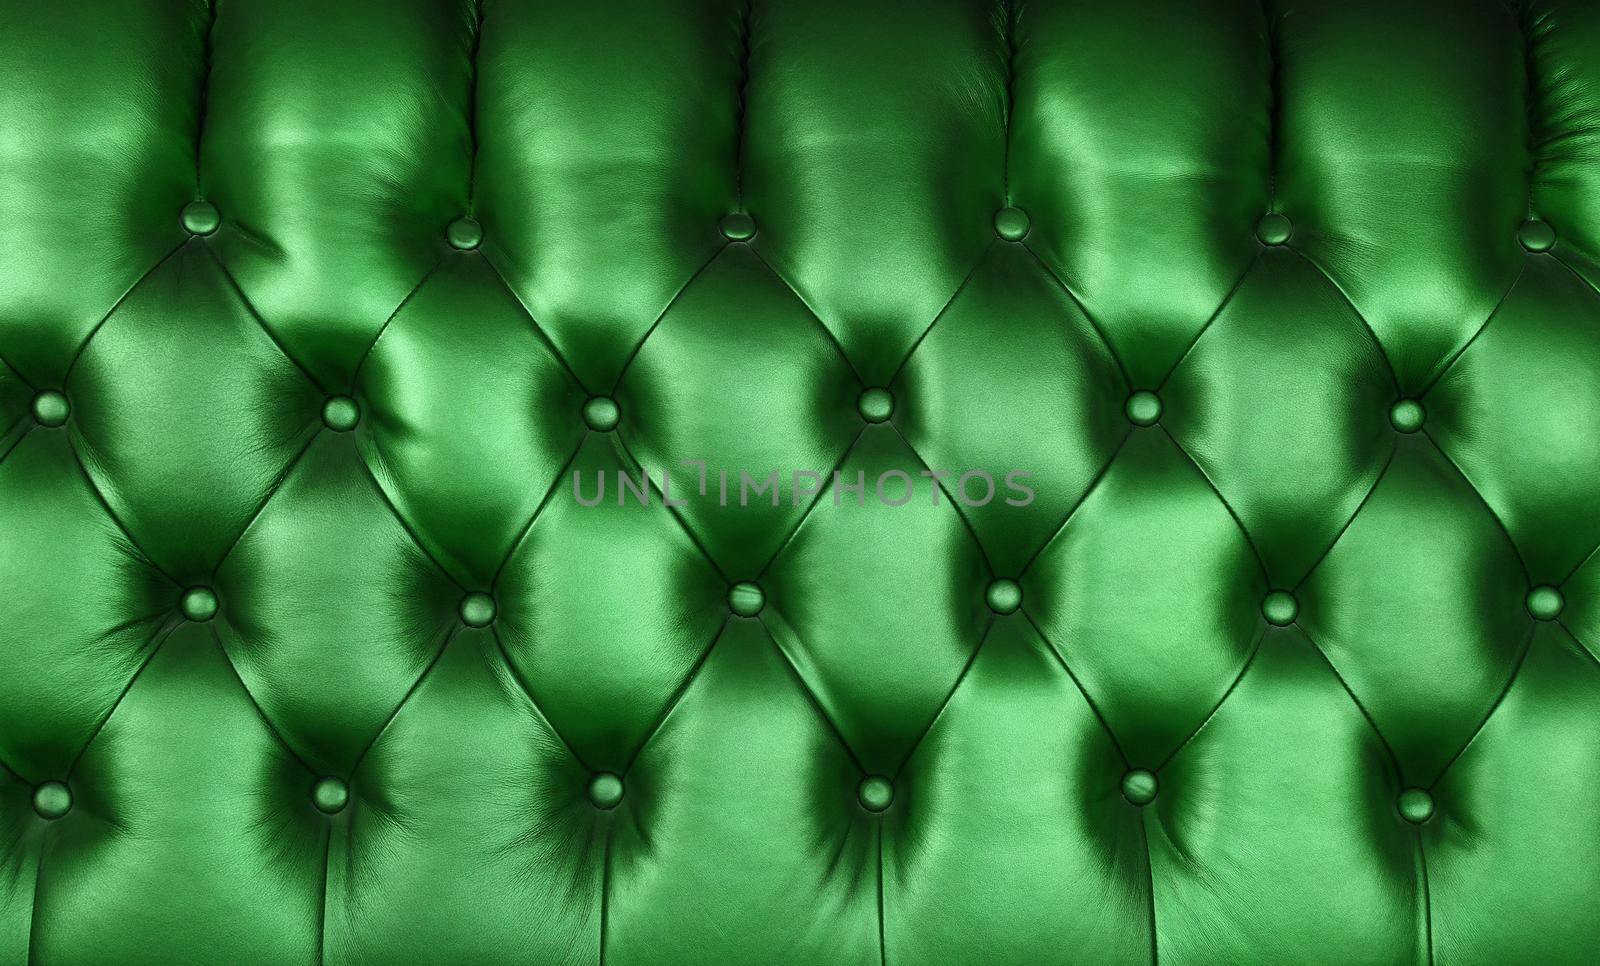 Background texture of dark emerald green capitone genuine leather, retro Chesterfield style soft tufted furniture upholstery with deep diamond pattern and buttons, close up